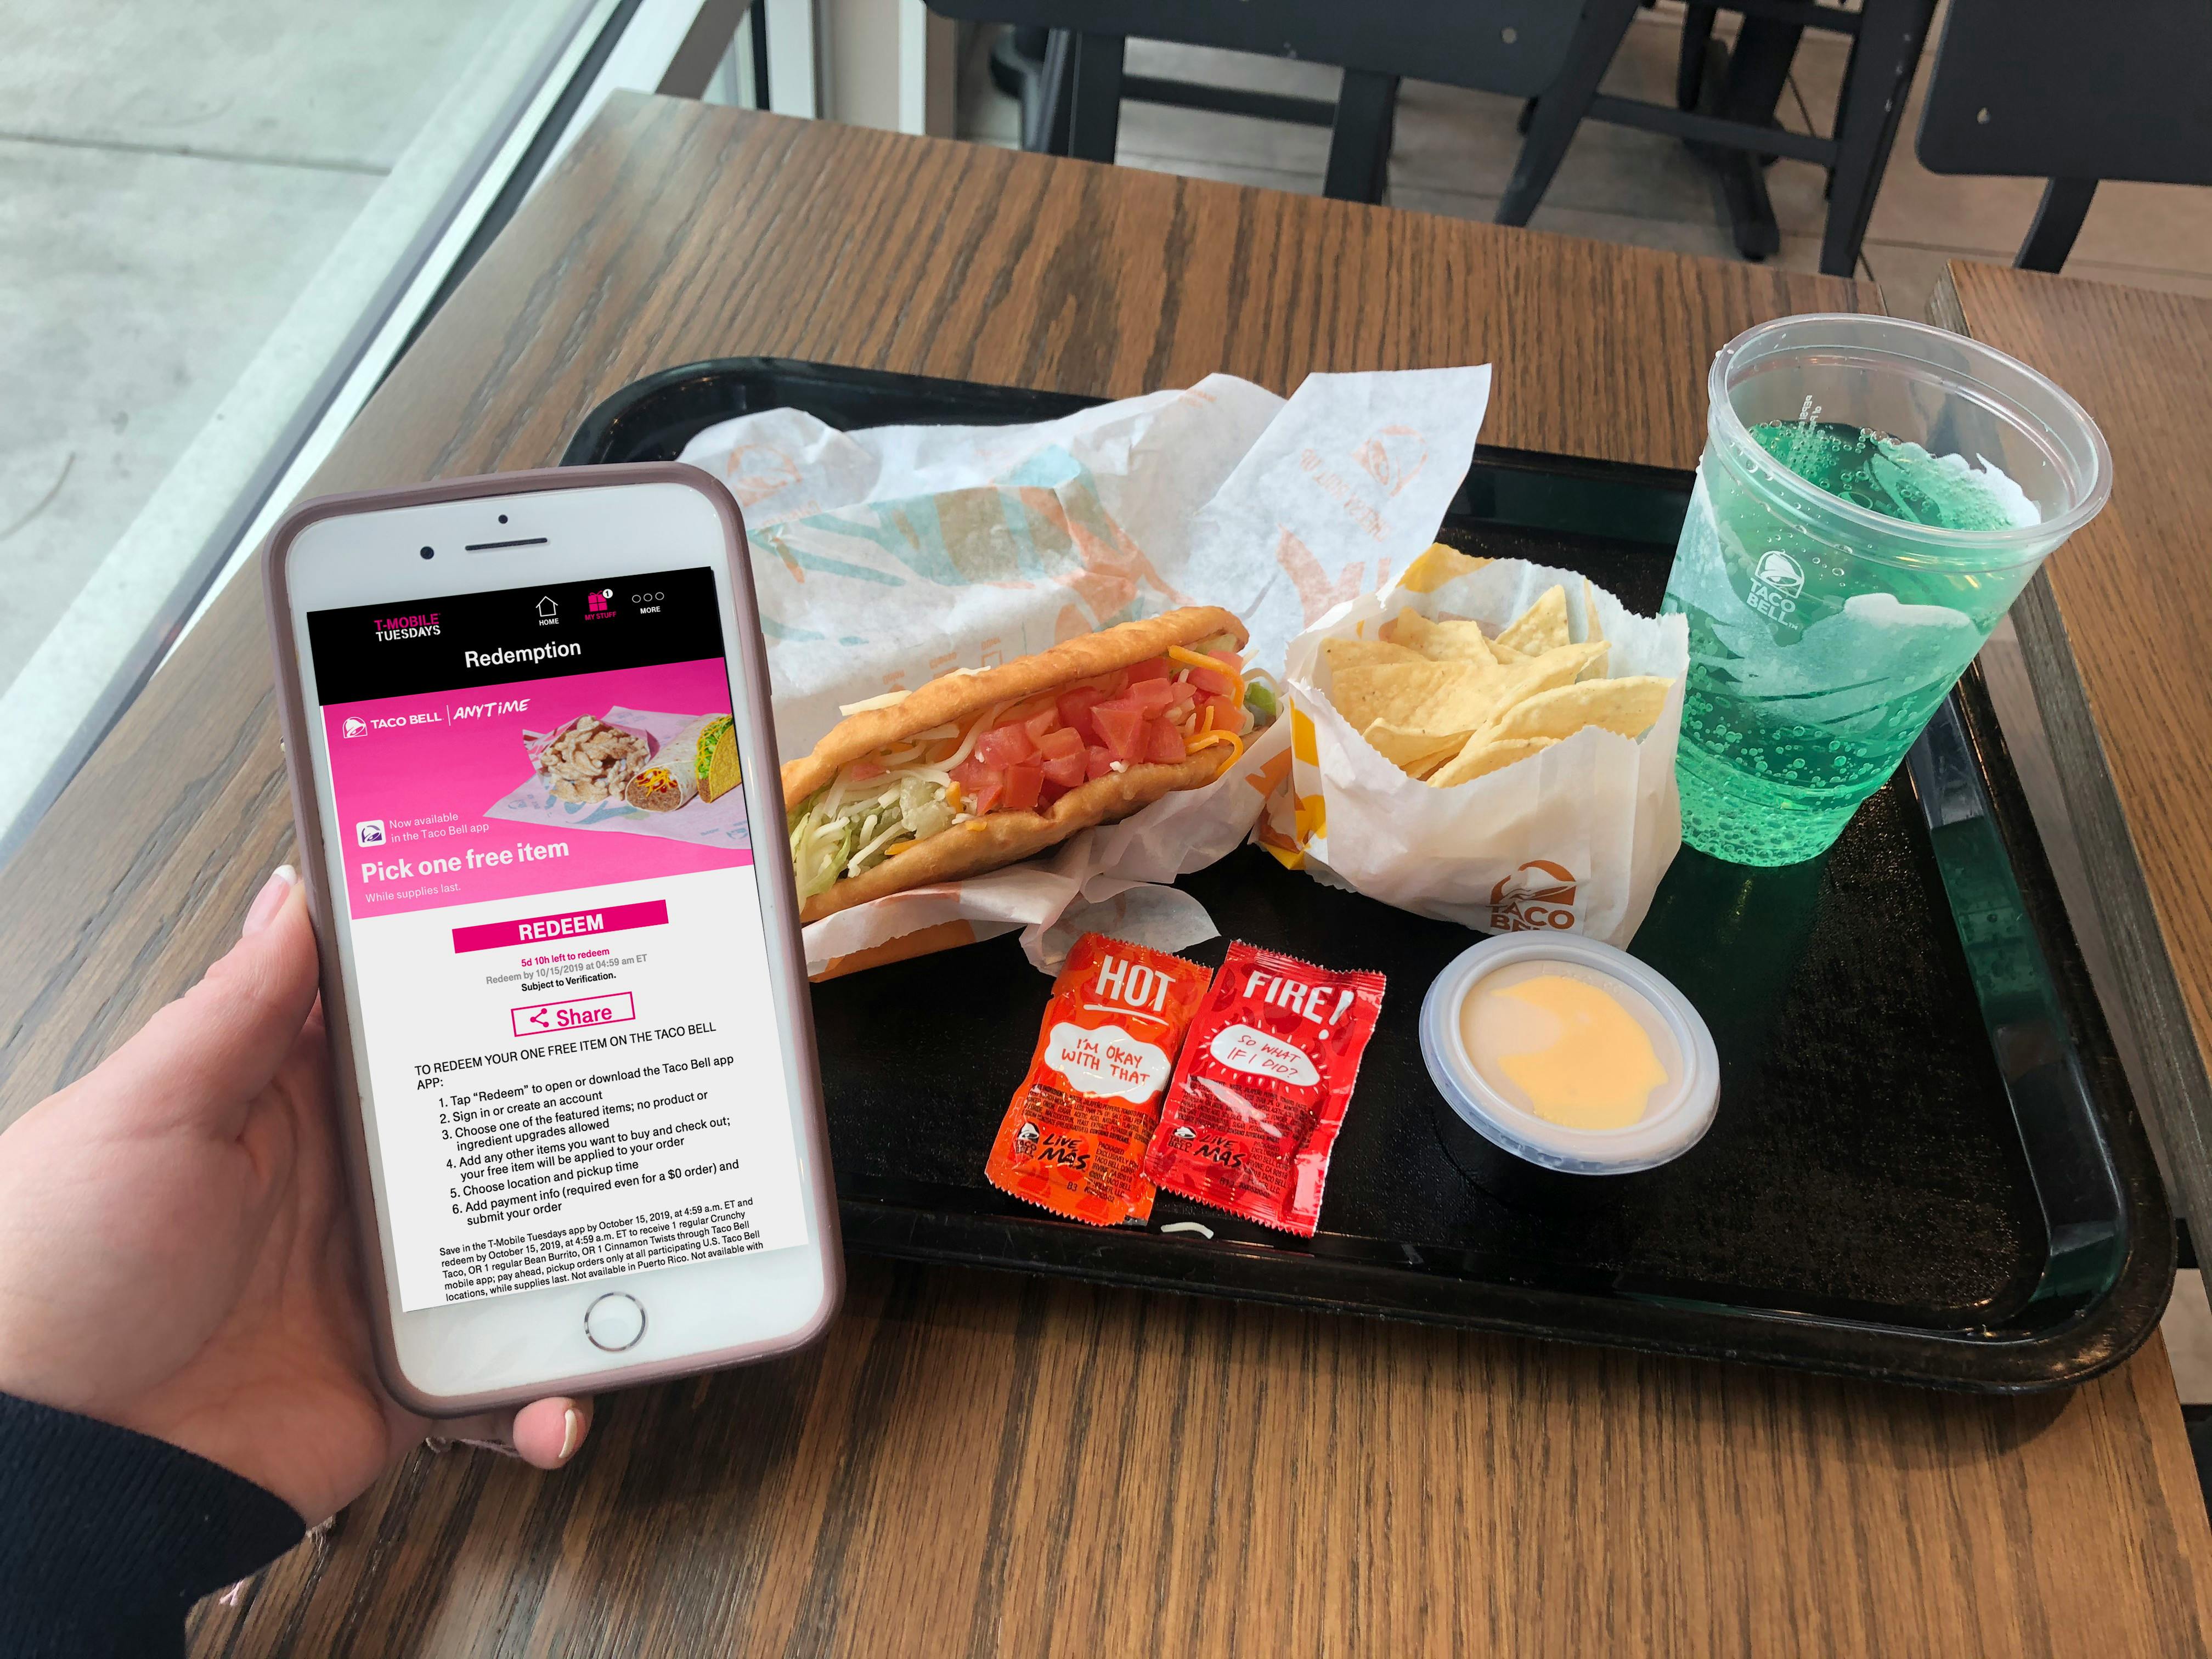 A person's hand holding a cell phone displaying the T-Mobile Tuesdays app's offer redemption page for a free Taco Bell item with Taco Bell food on a tray in the background.